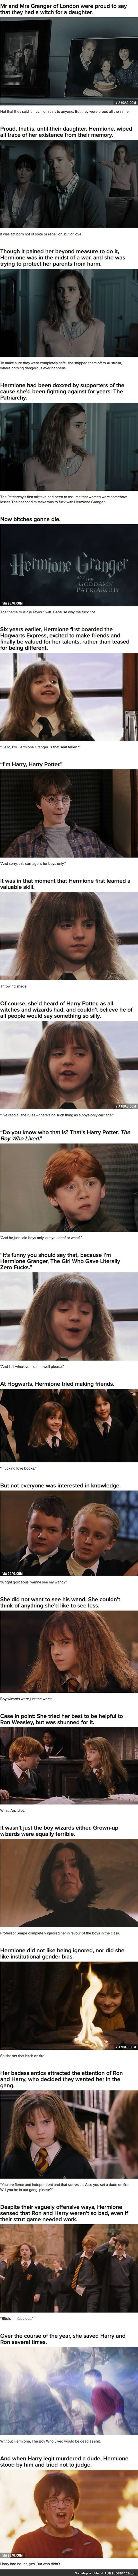 What If Hermione Was The Main Character?